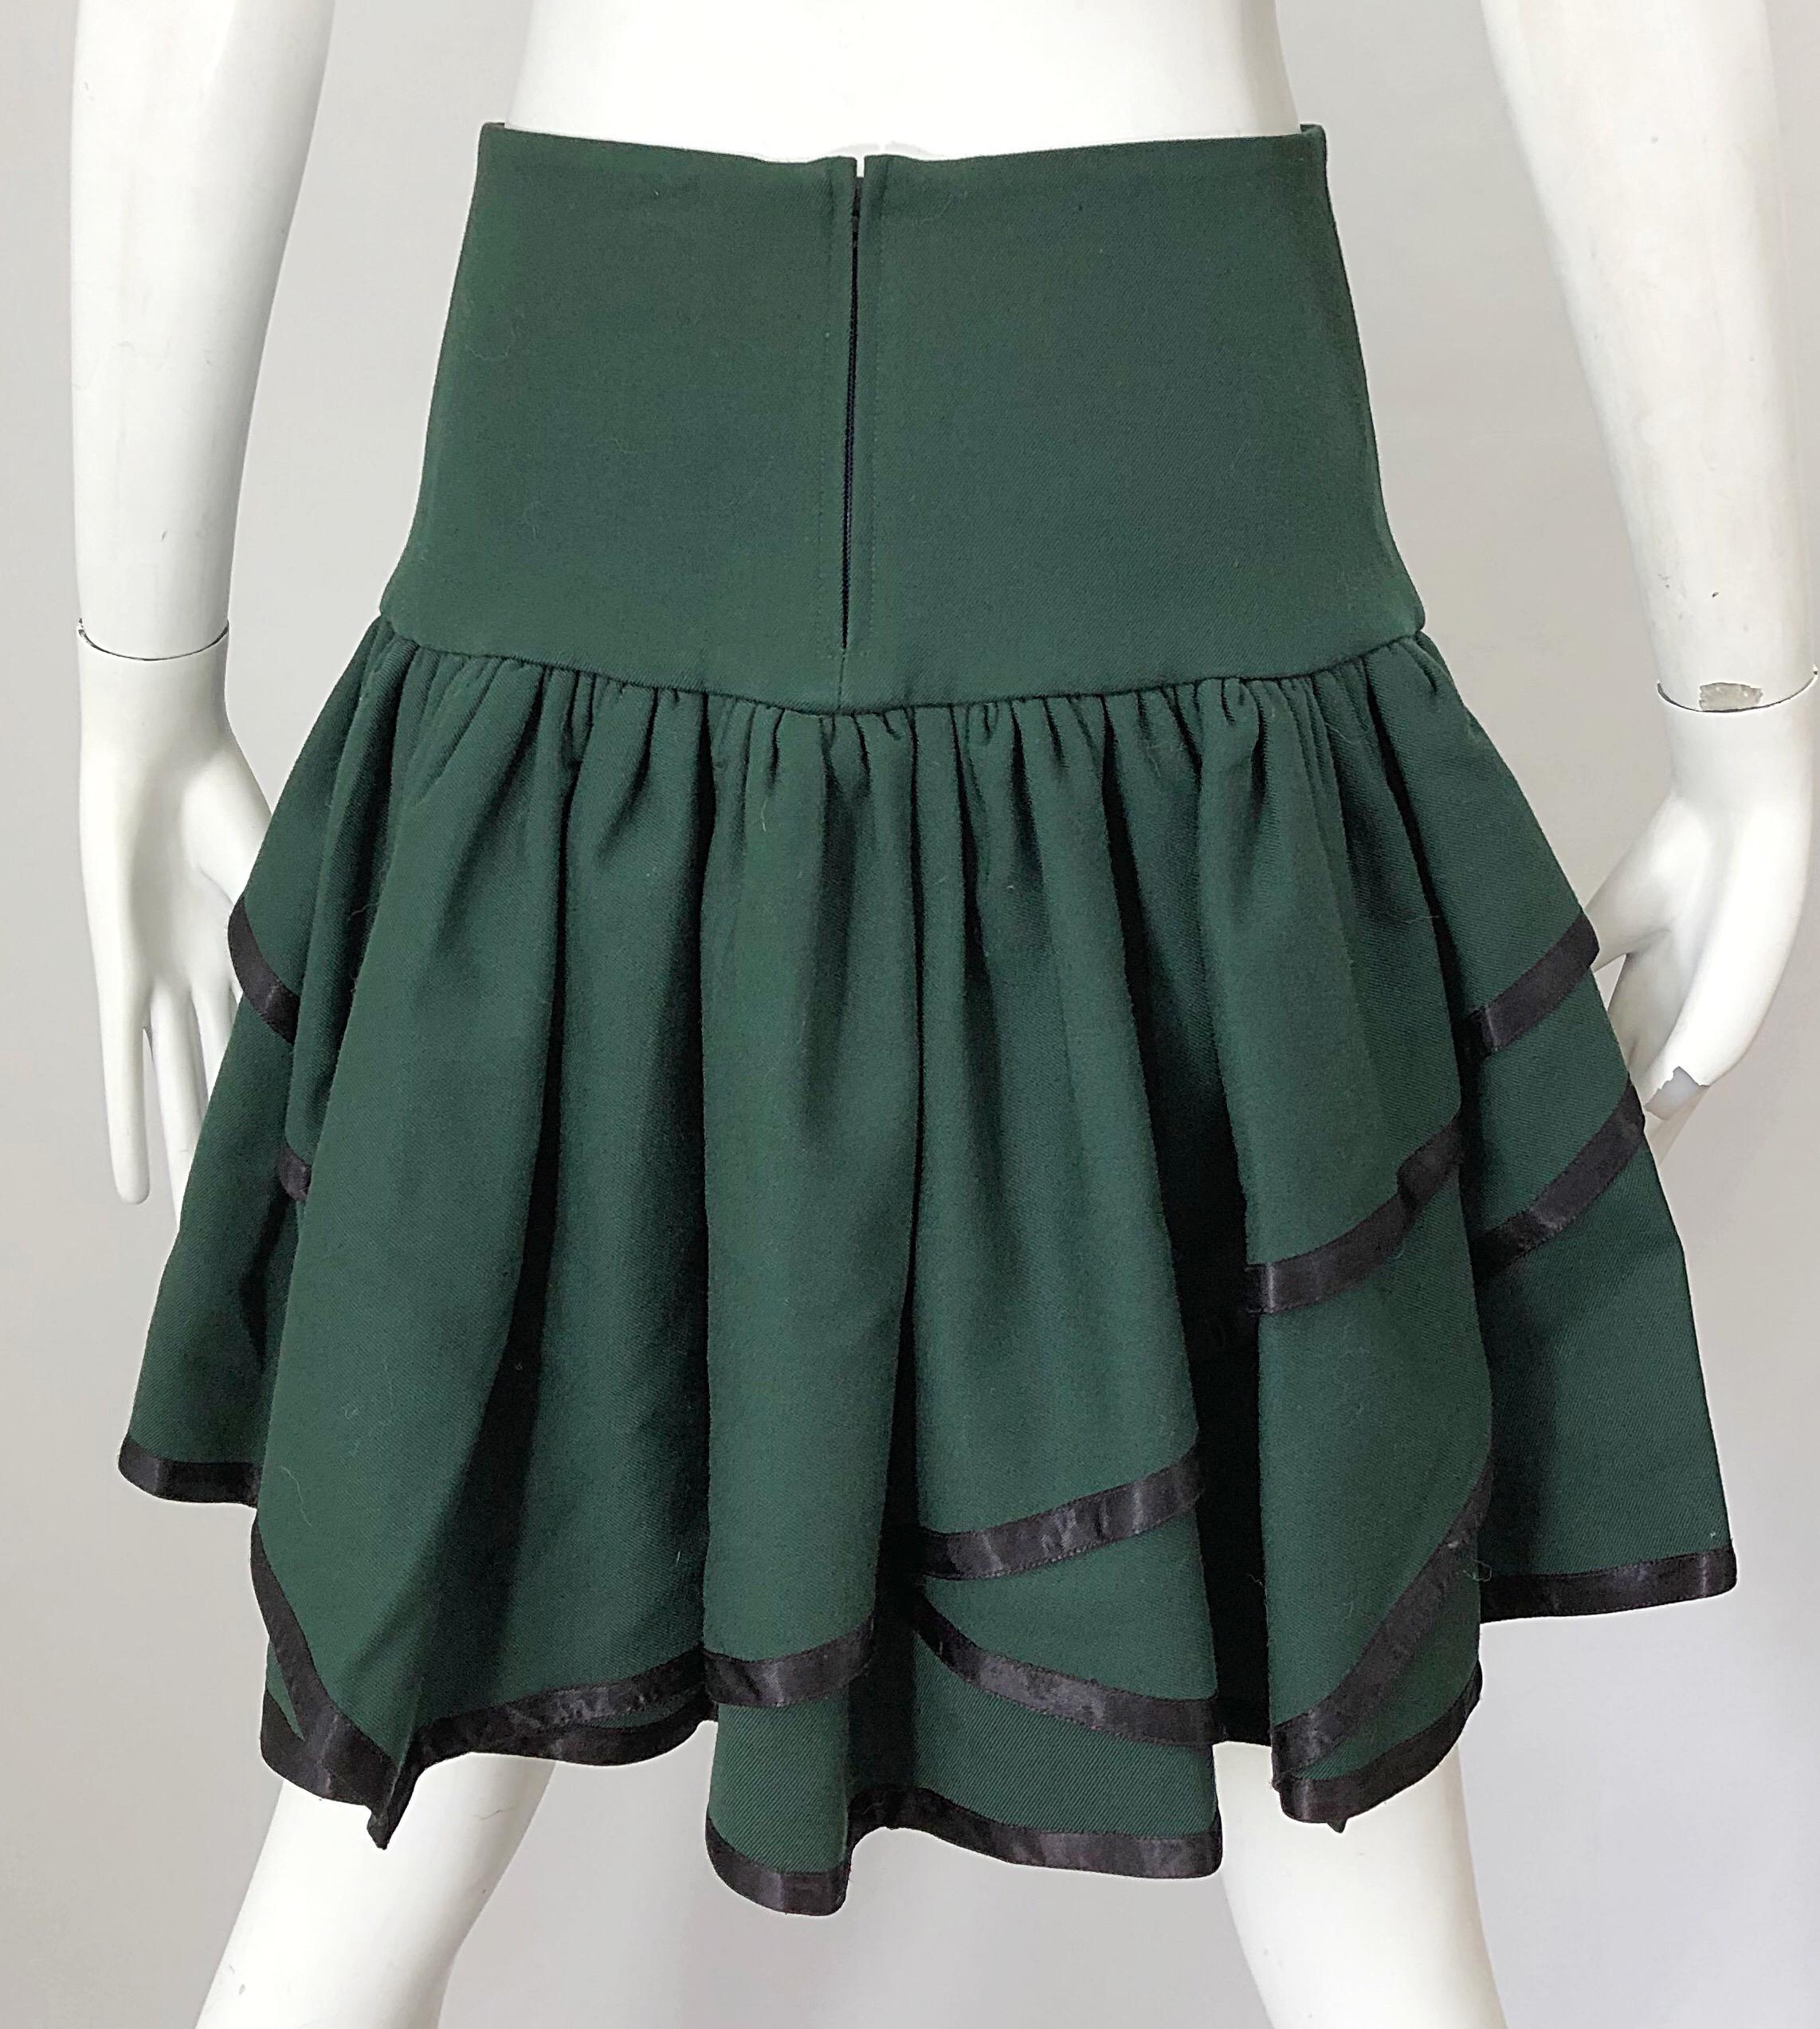 Rare 1960s Cardinali Hunter Green Wool Handkerchief Hem Vintage 60s Mini Skirt In Excellent Condition For Sale In San Diego, CA